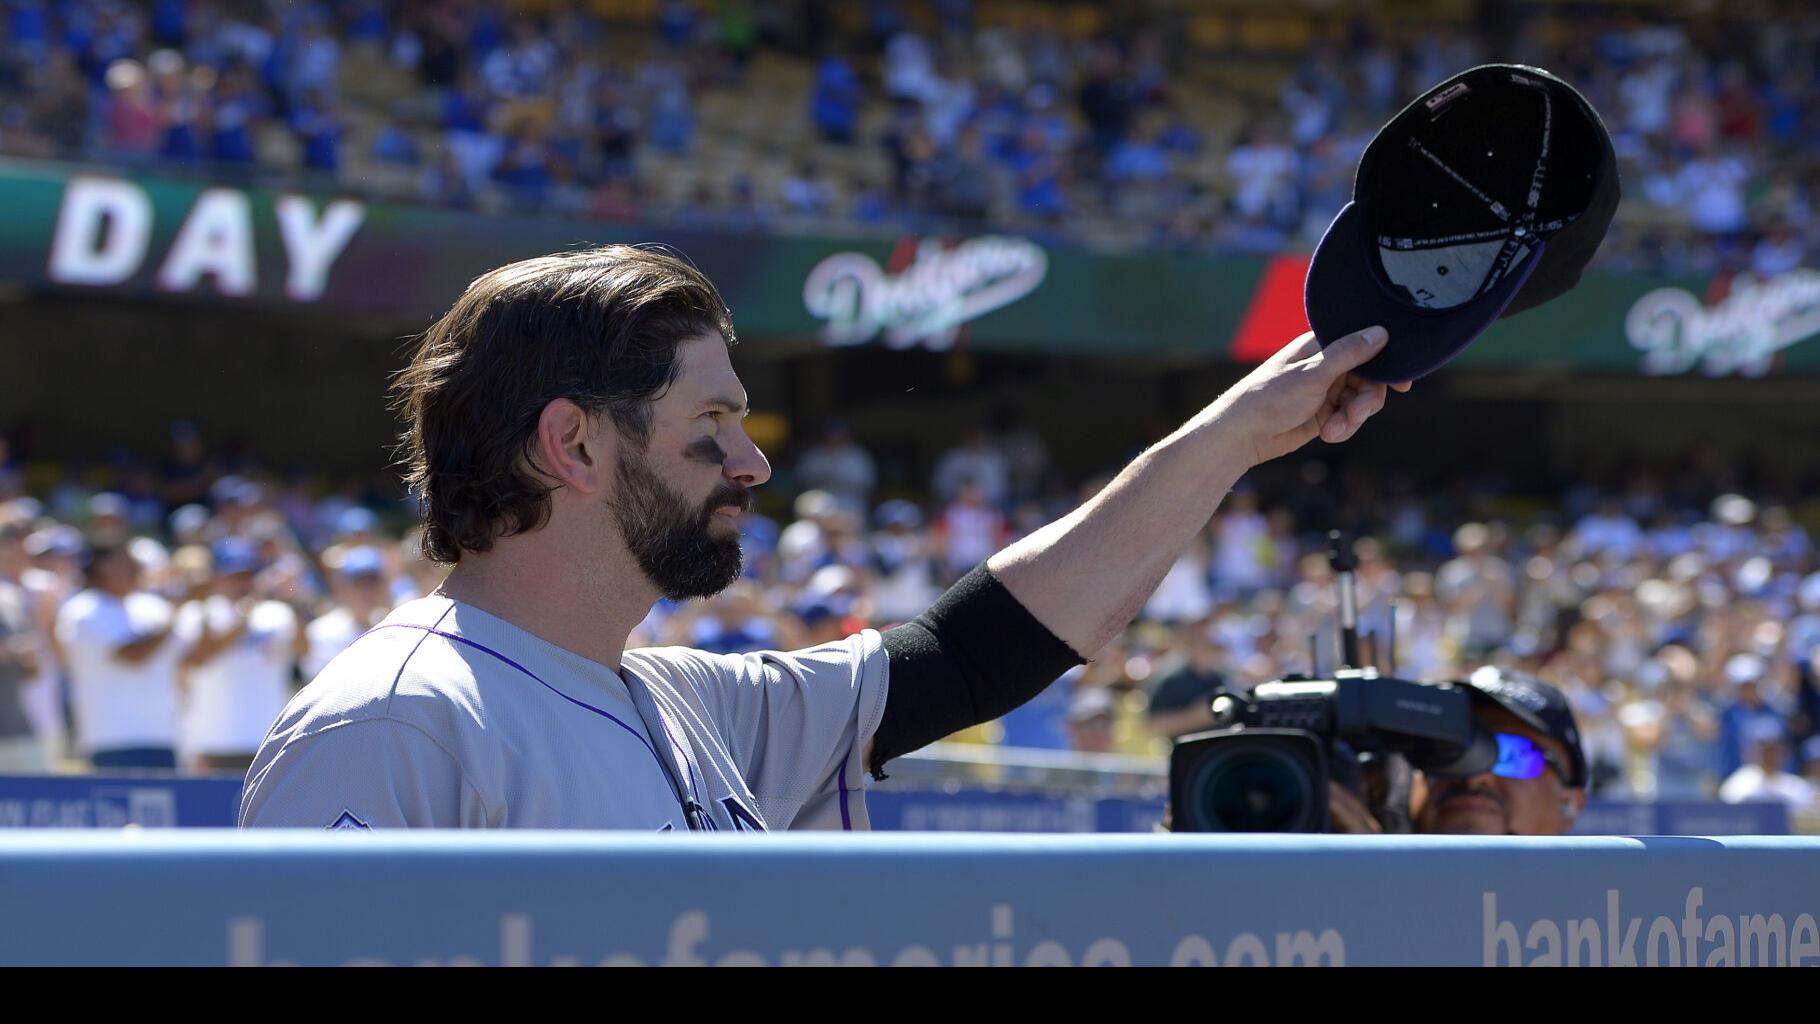 Todd Helton misses Baseball Hall of Fame for fifth year on ballot, Rockies